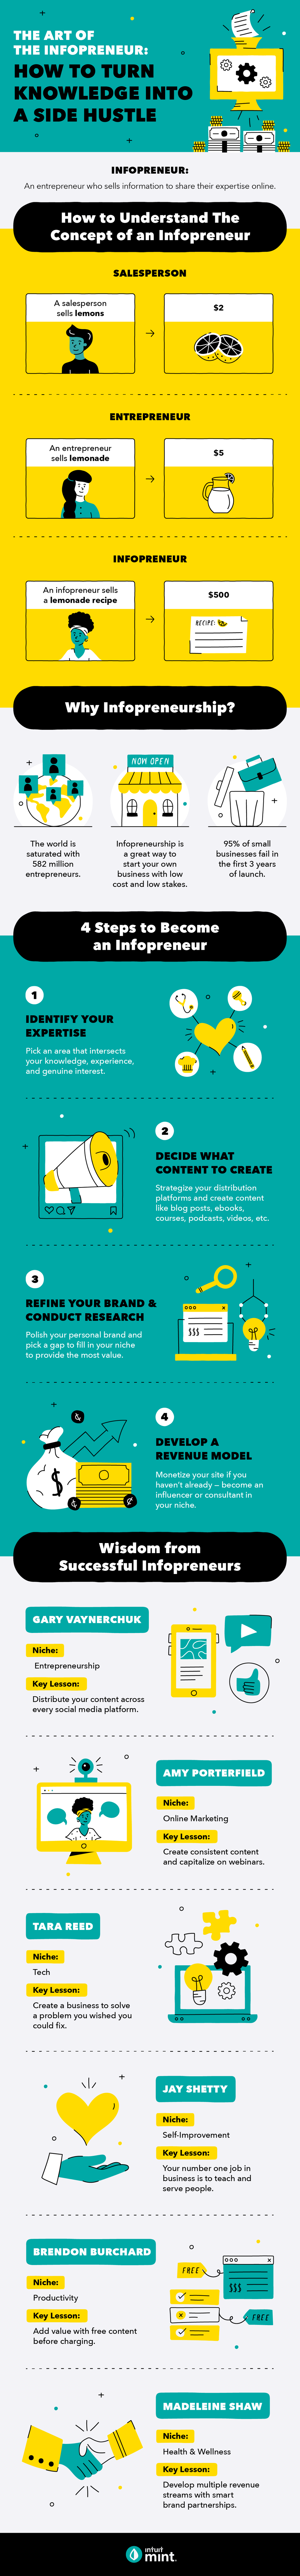 Infographic on the art of being an infopreneur